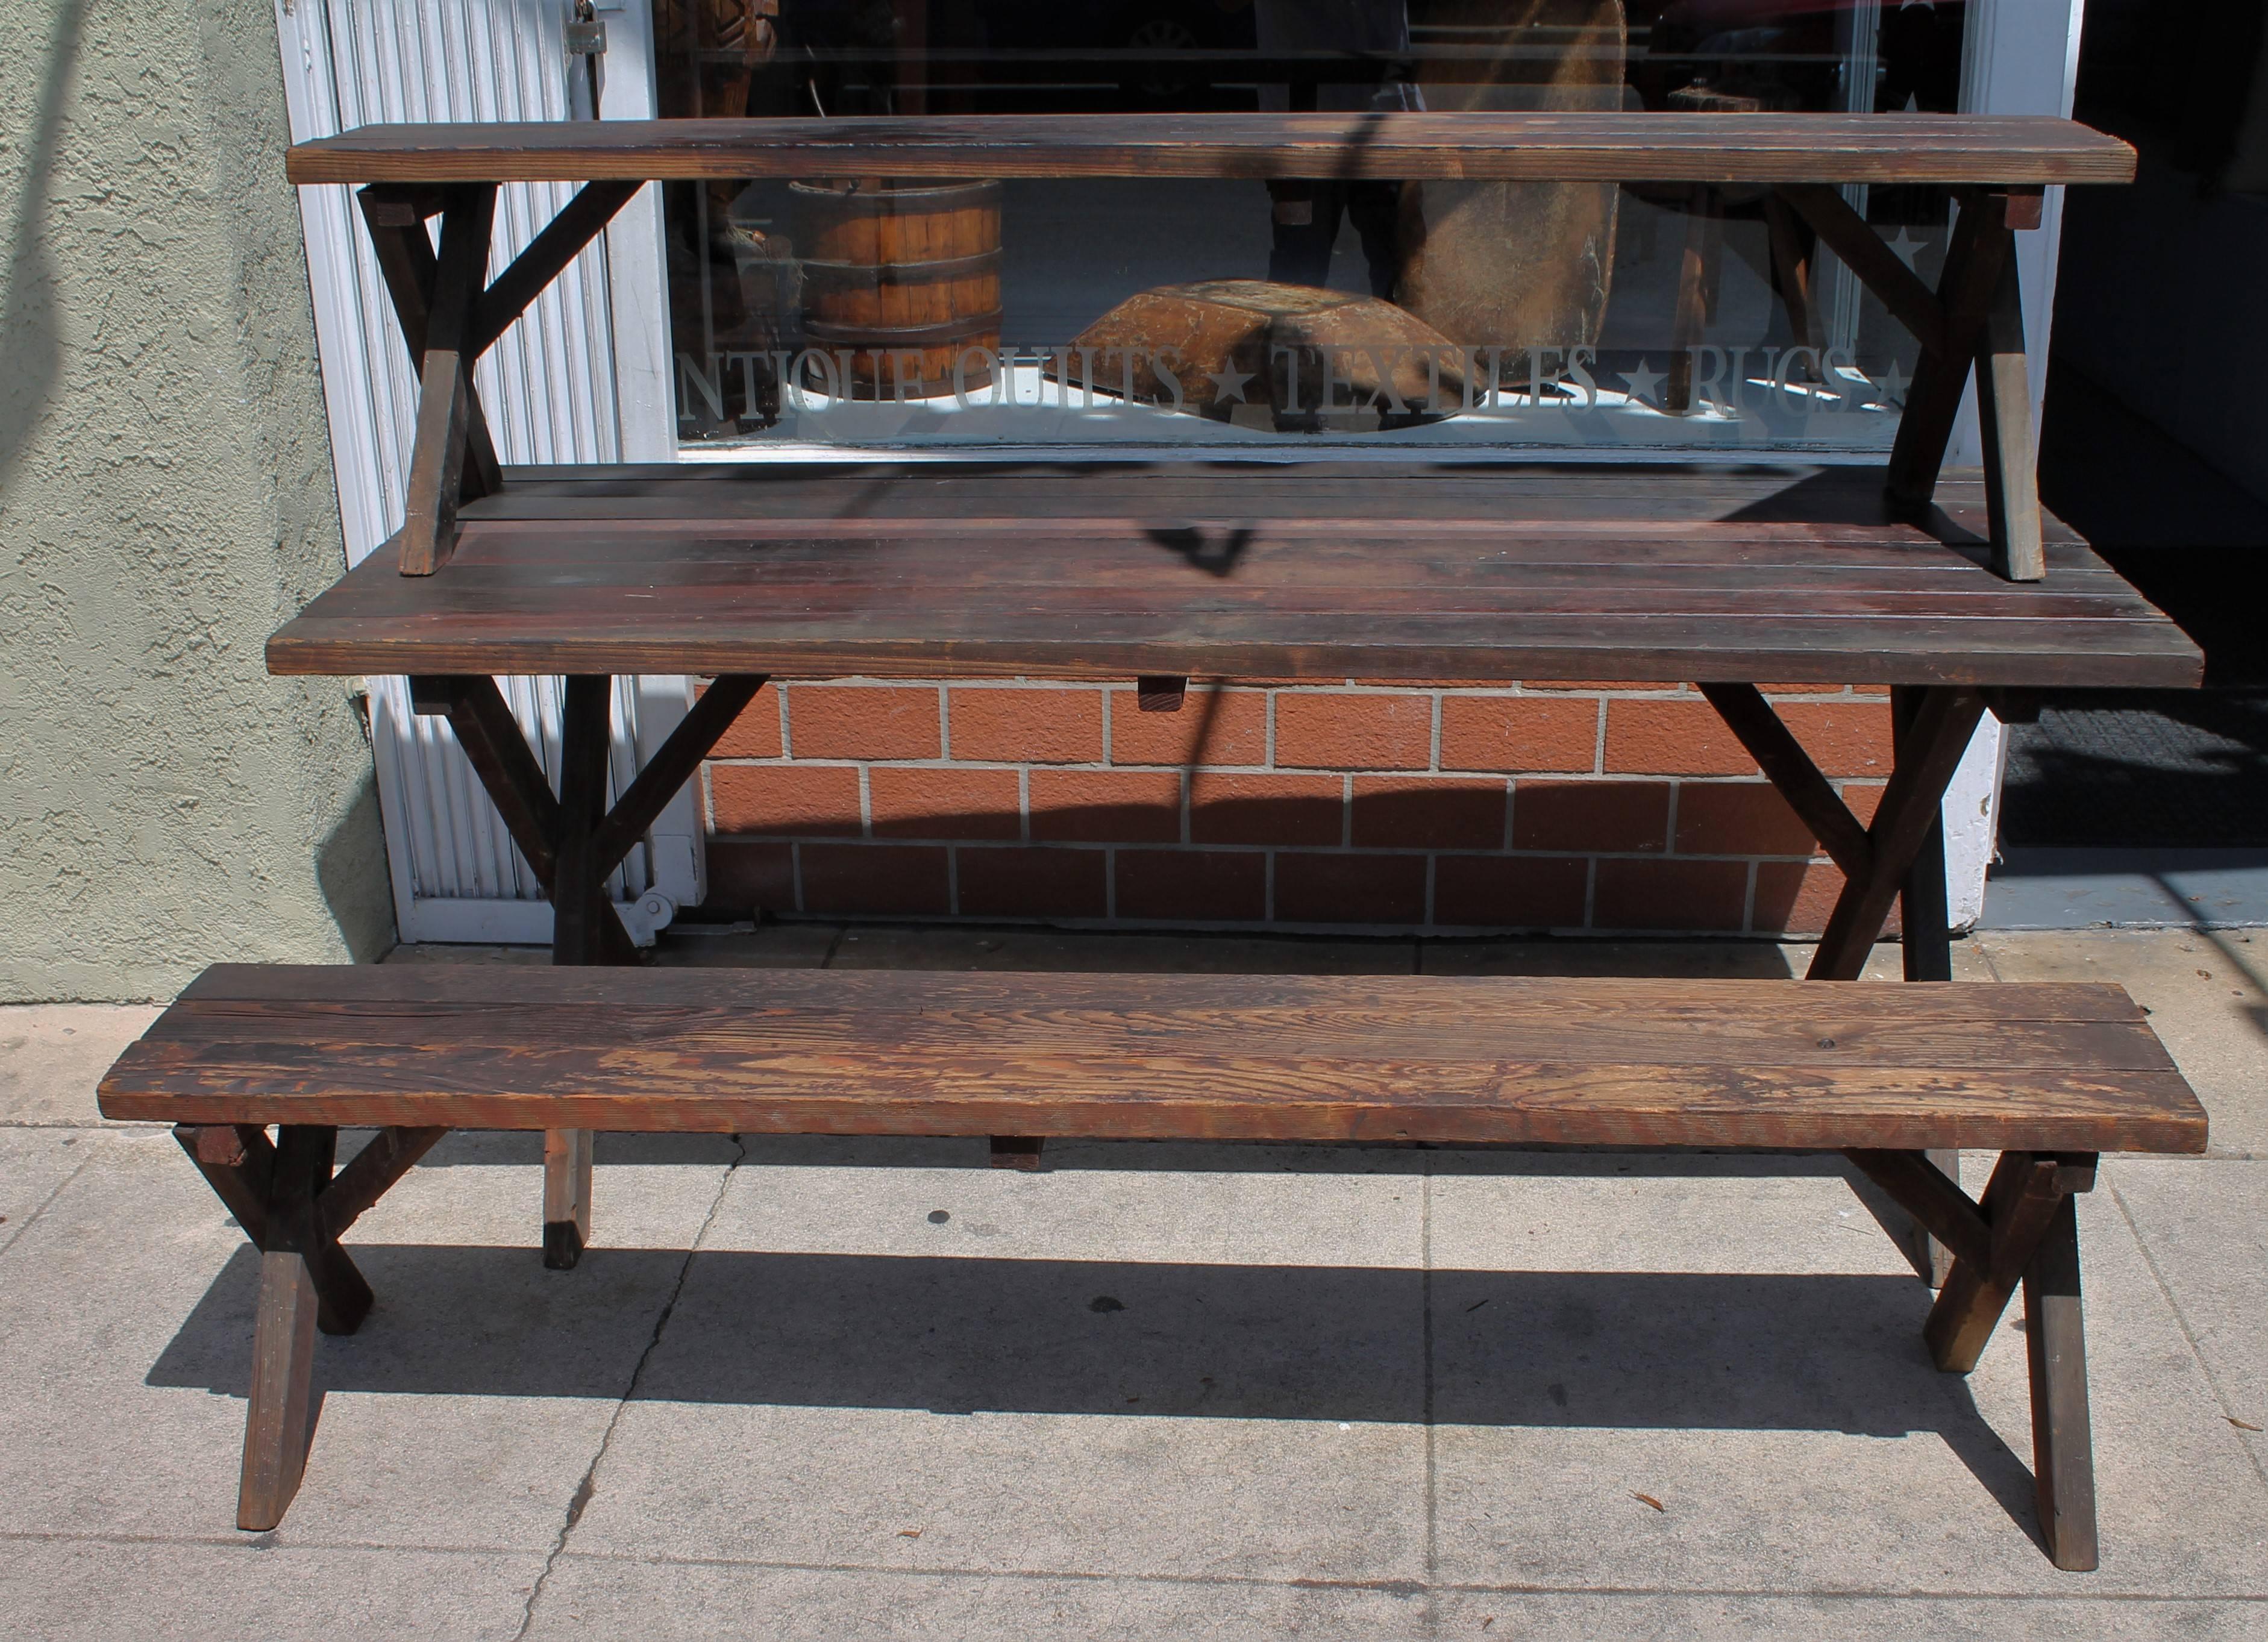 Hand-Crafted Rustic Picnic Table and Matching Benches